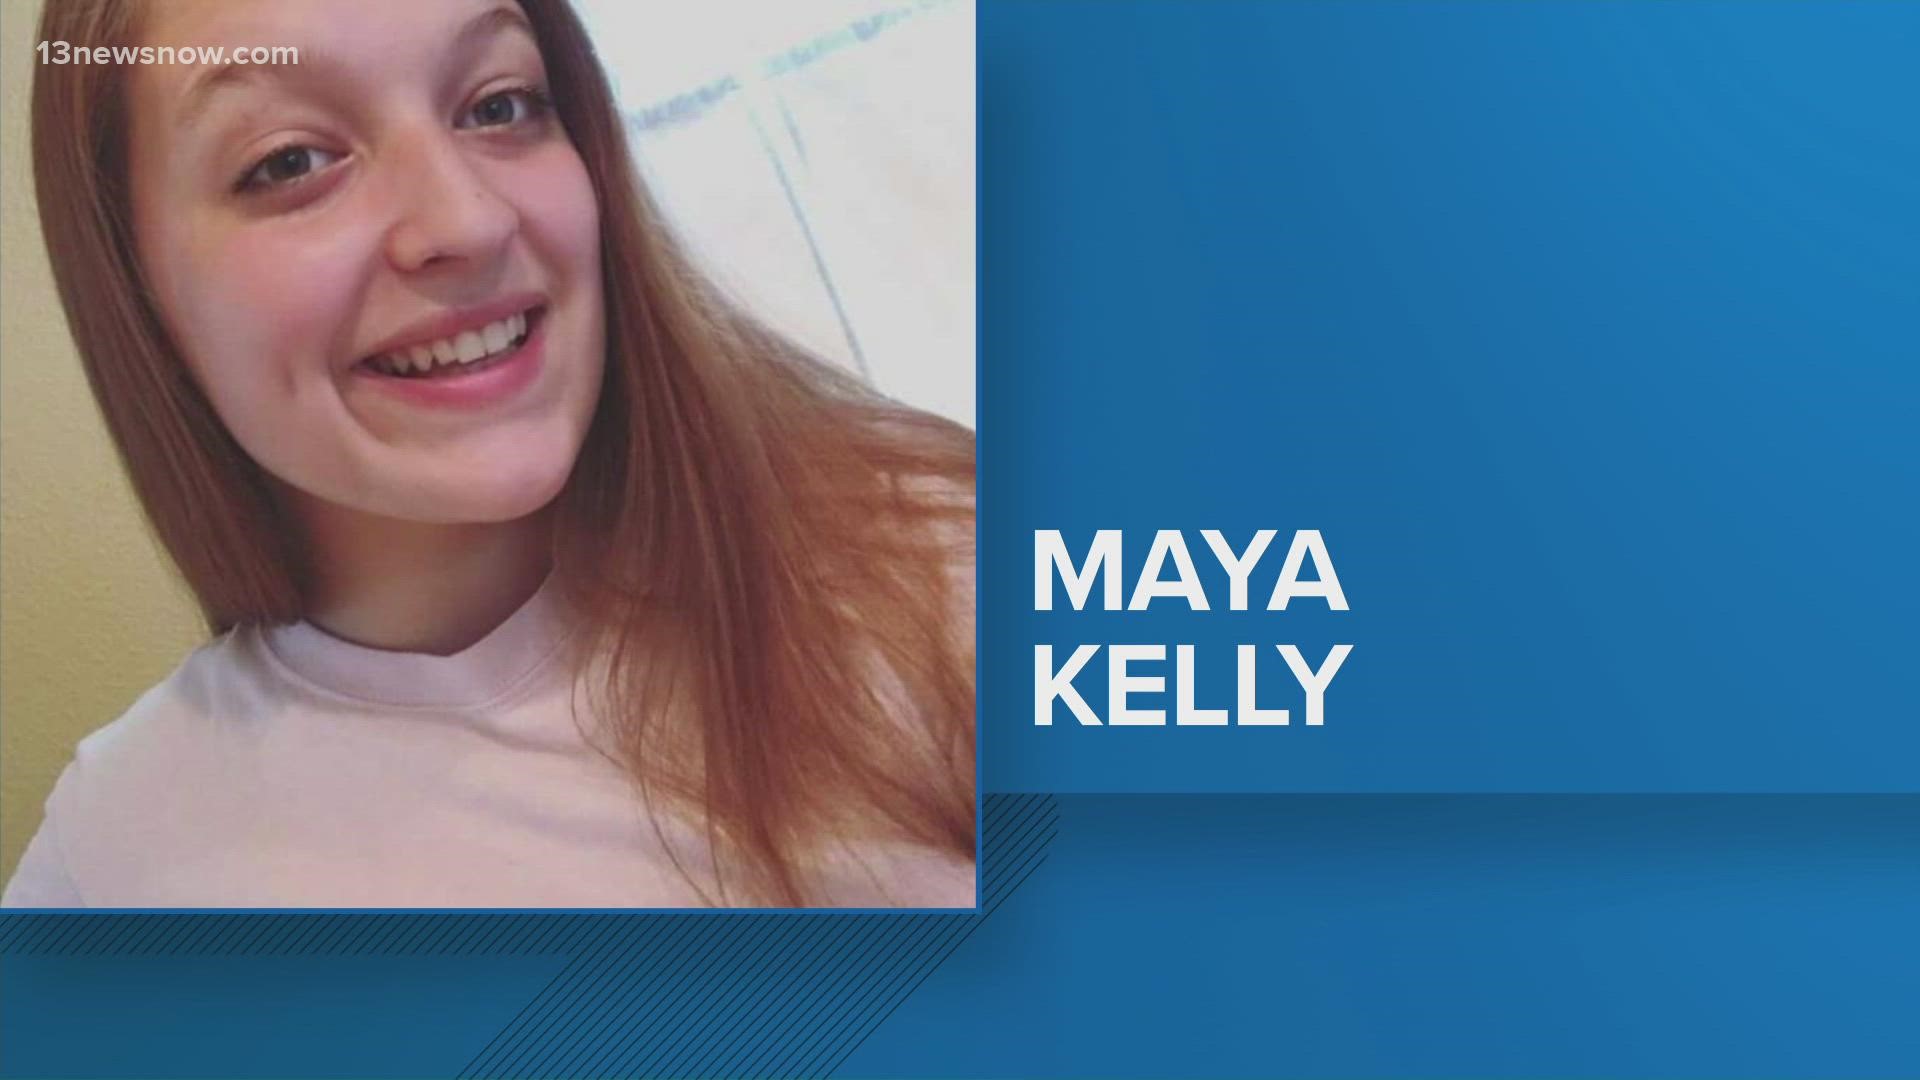 Investigators think Maya Kelly had been talking to a man who might be in the military before she went missing.